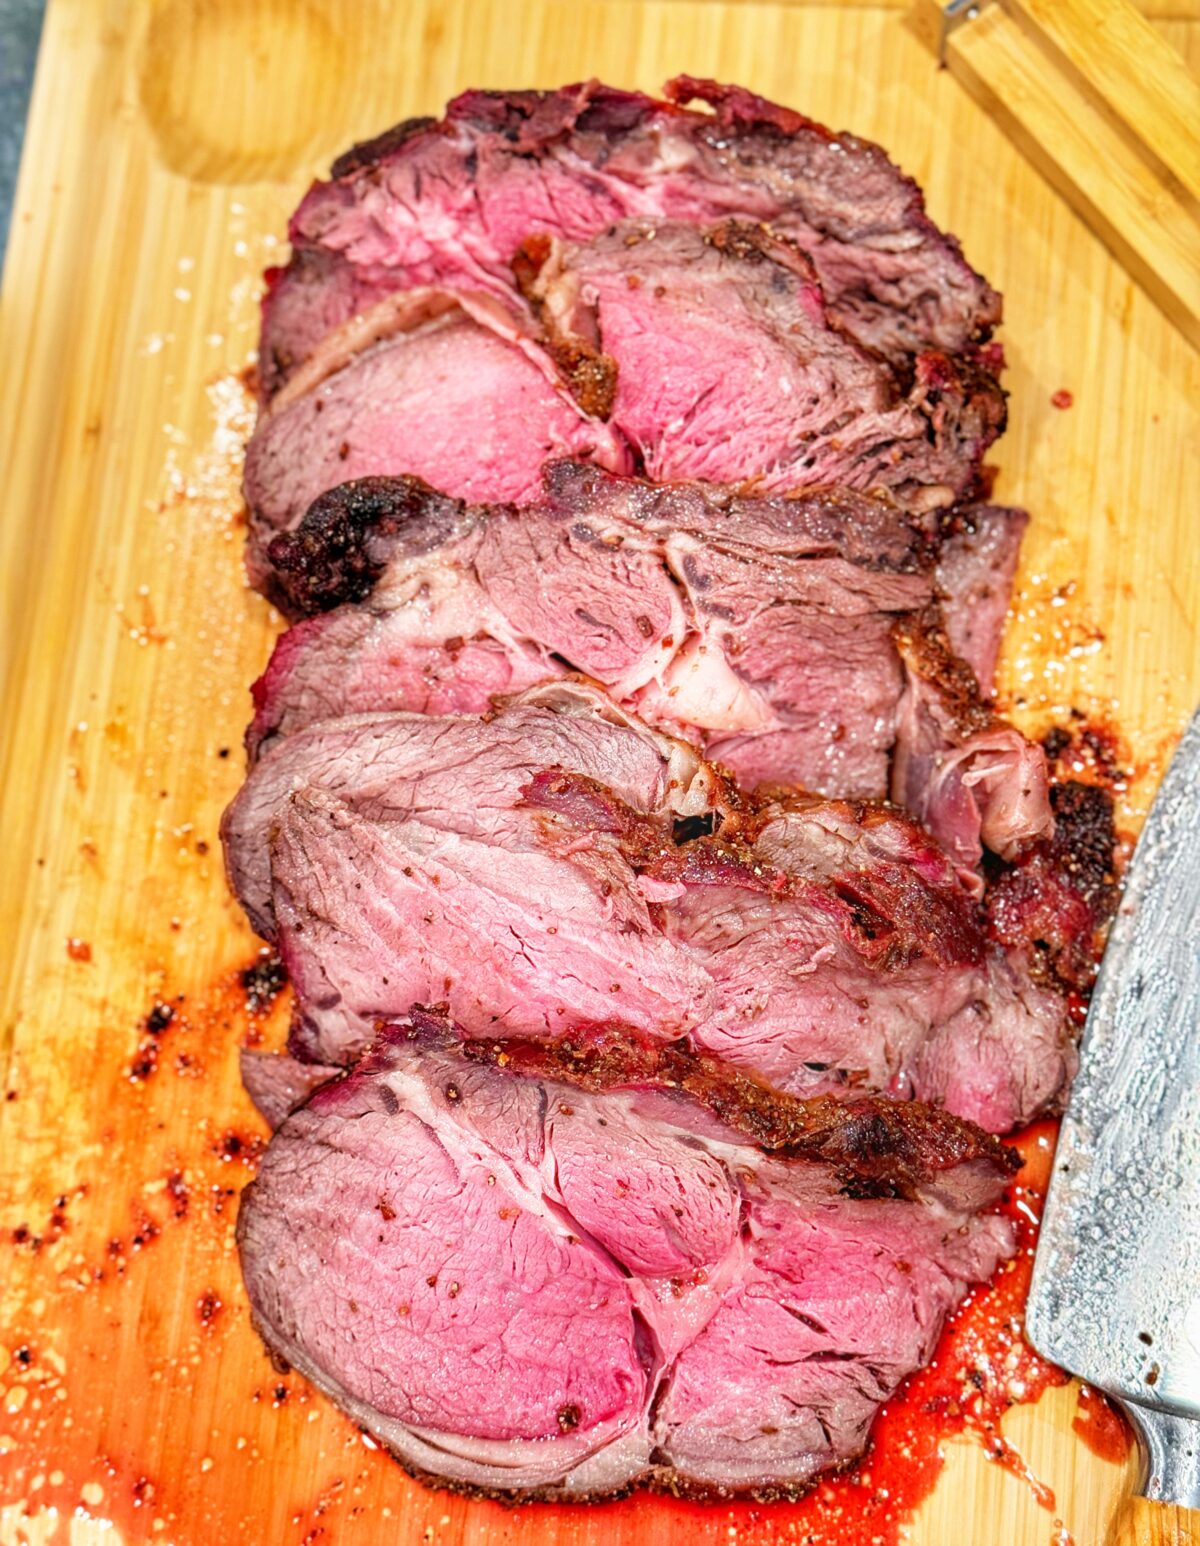 Sliced smoked-fried prime rib on a cutting board.